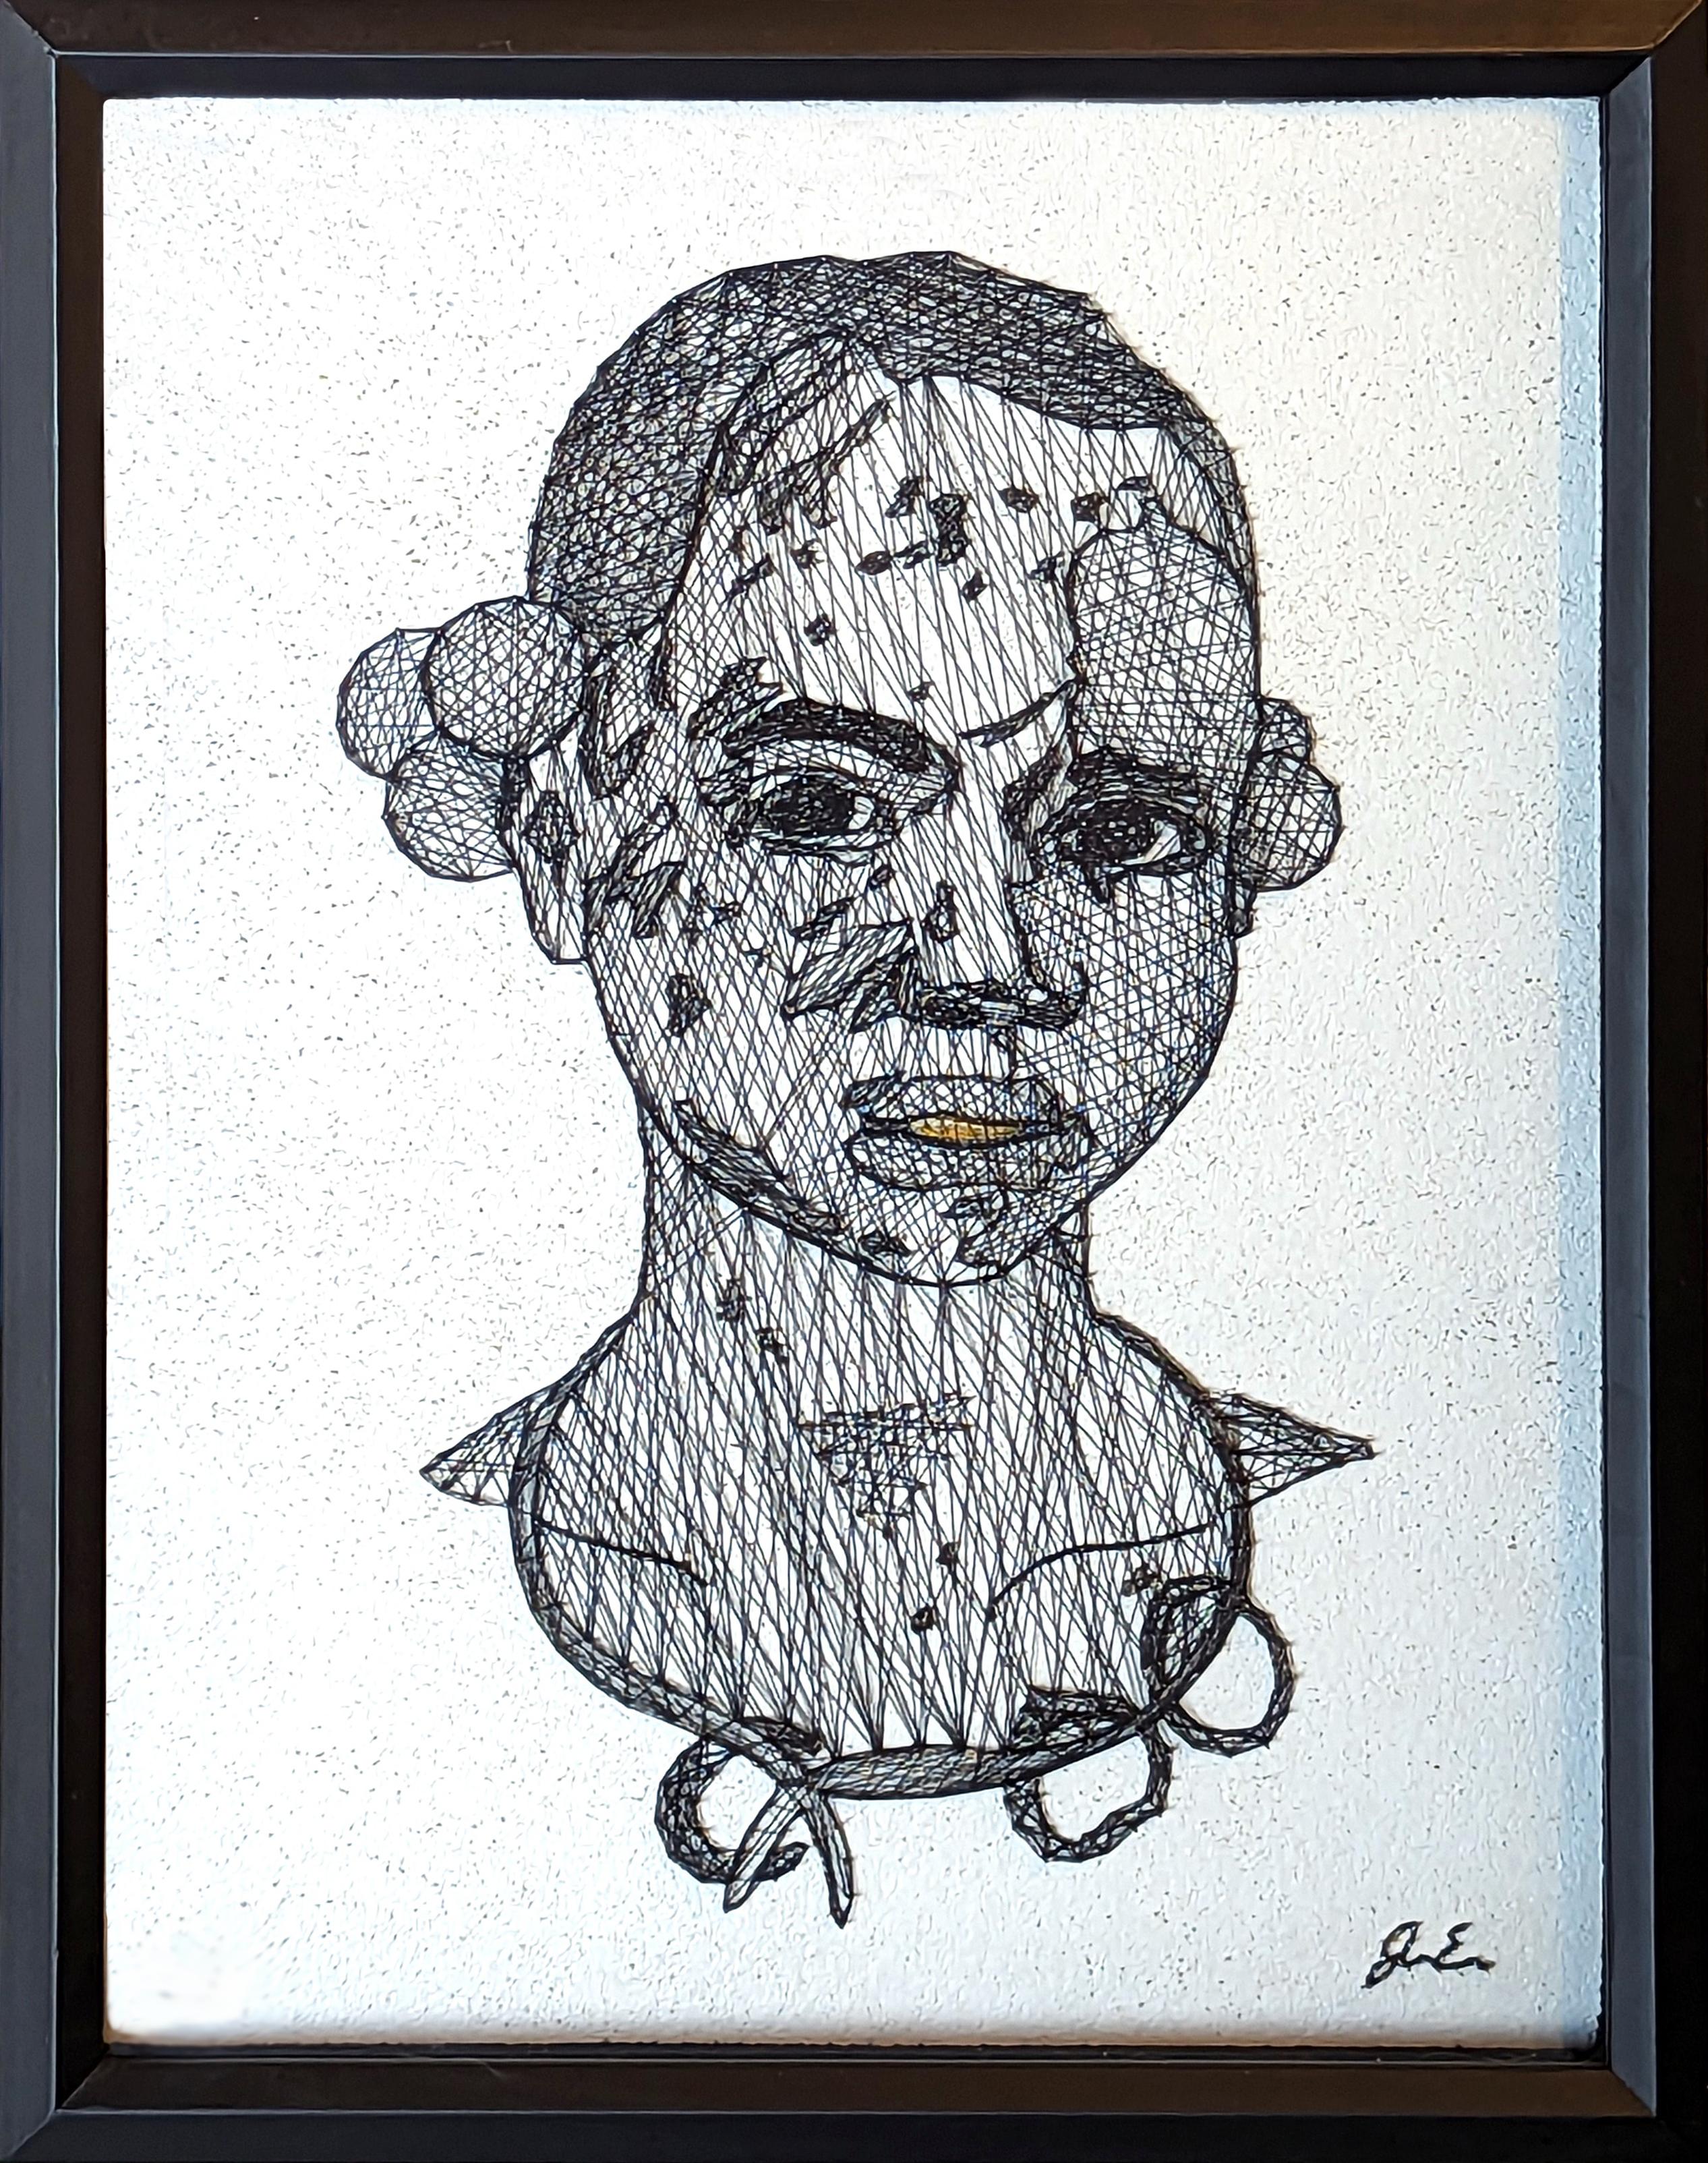 "Opulence VII" Contemporary Black and White Pin and Thread Mixed Media Portrait 